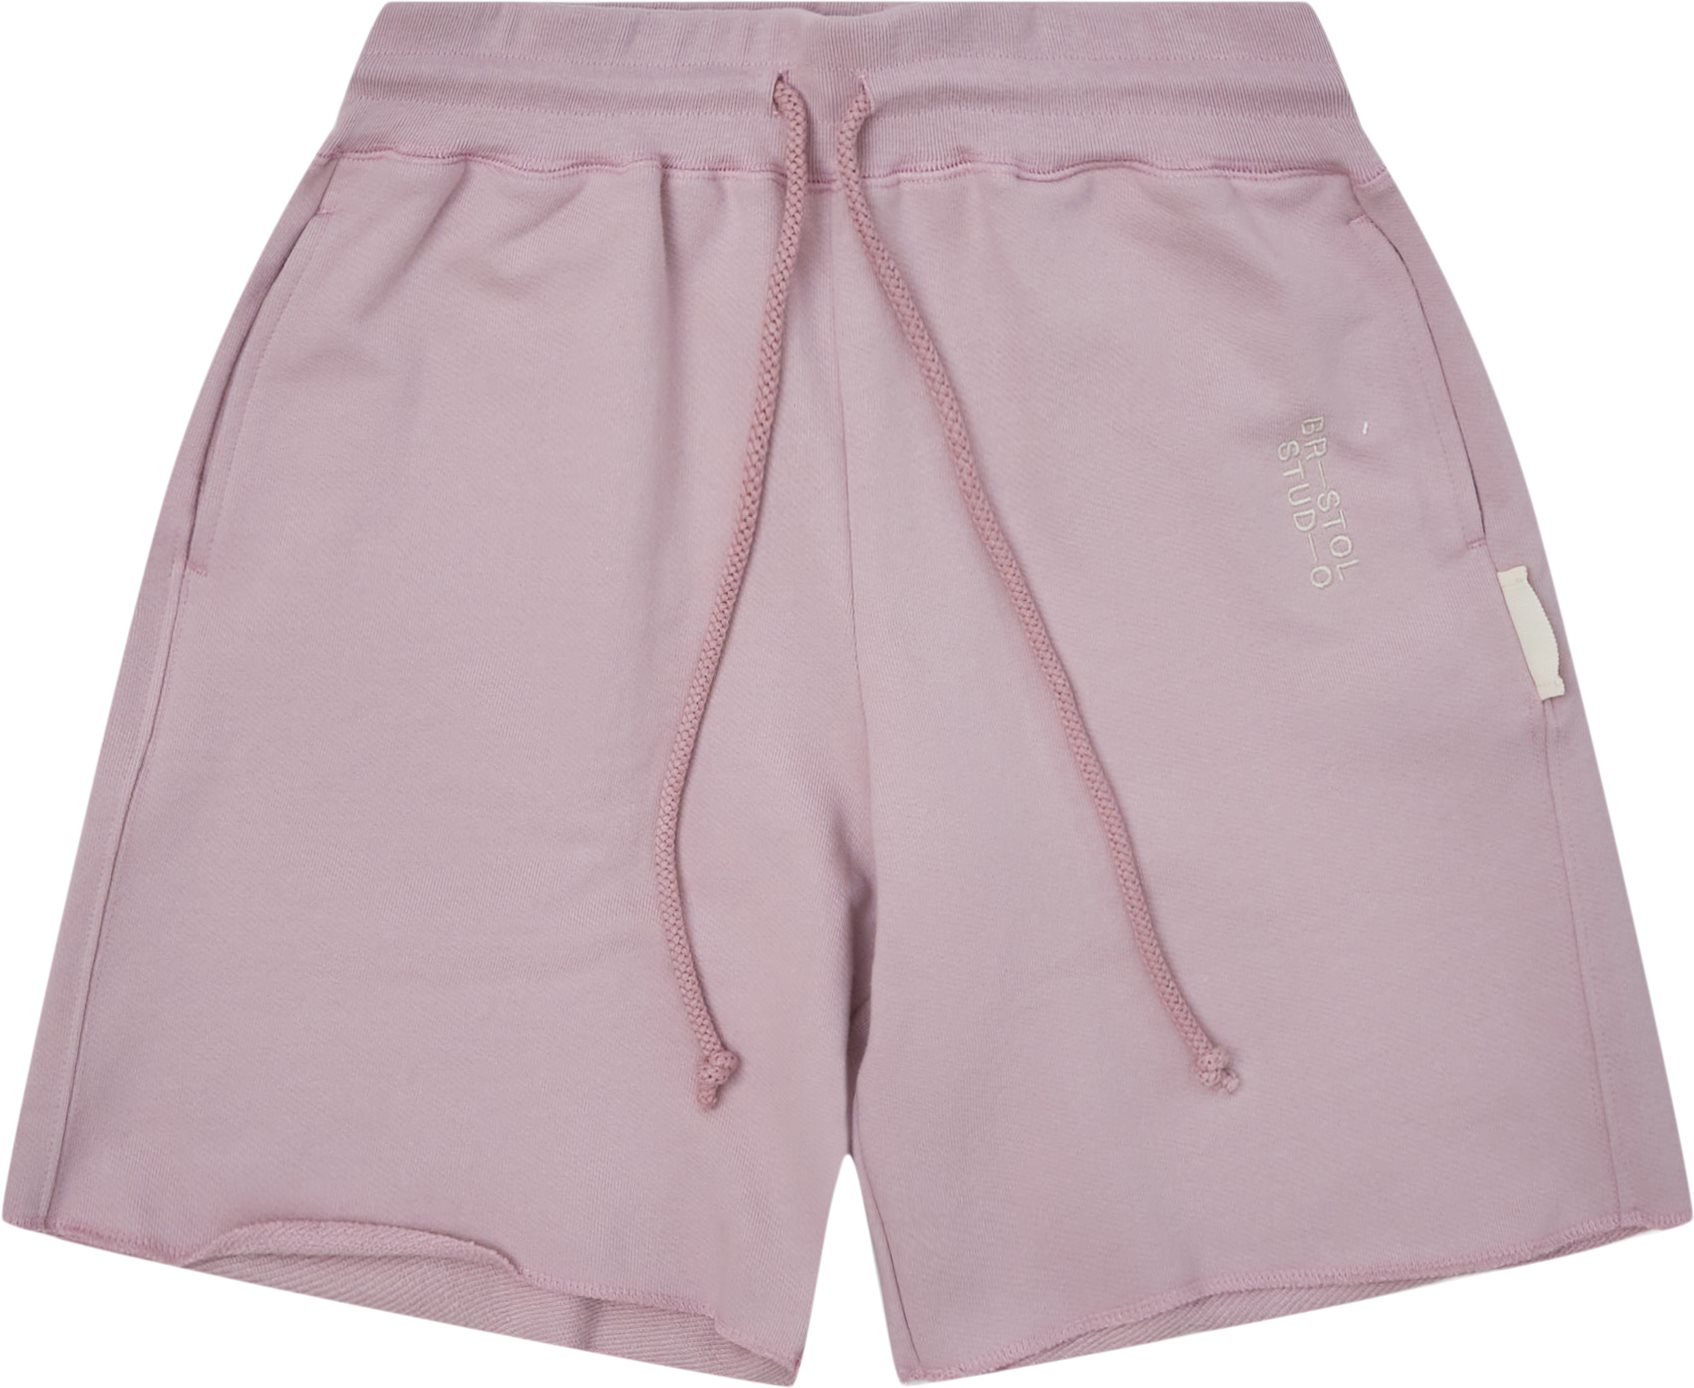 Home Team Sweat Shorts - Shorts - Loose fit - Lilac